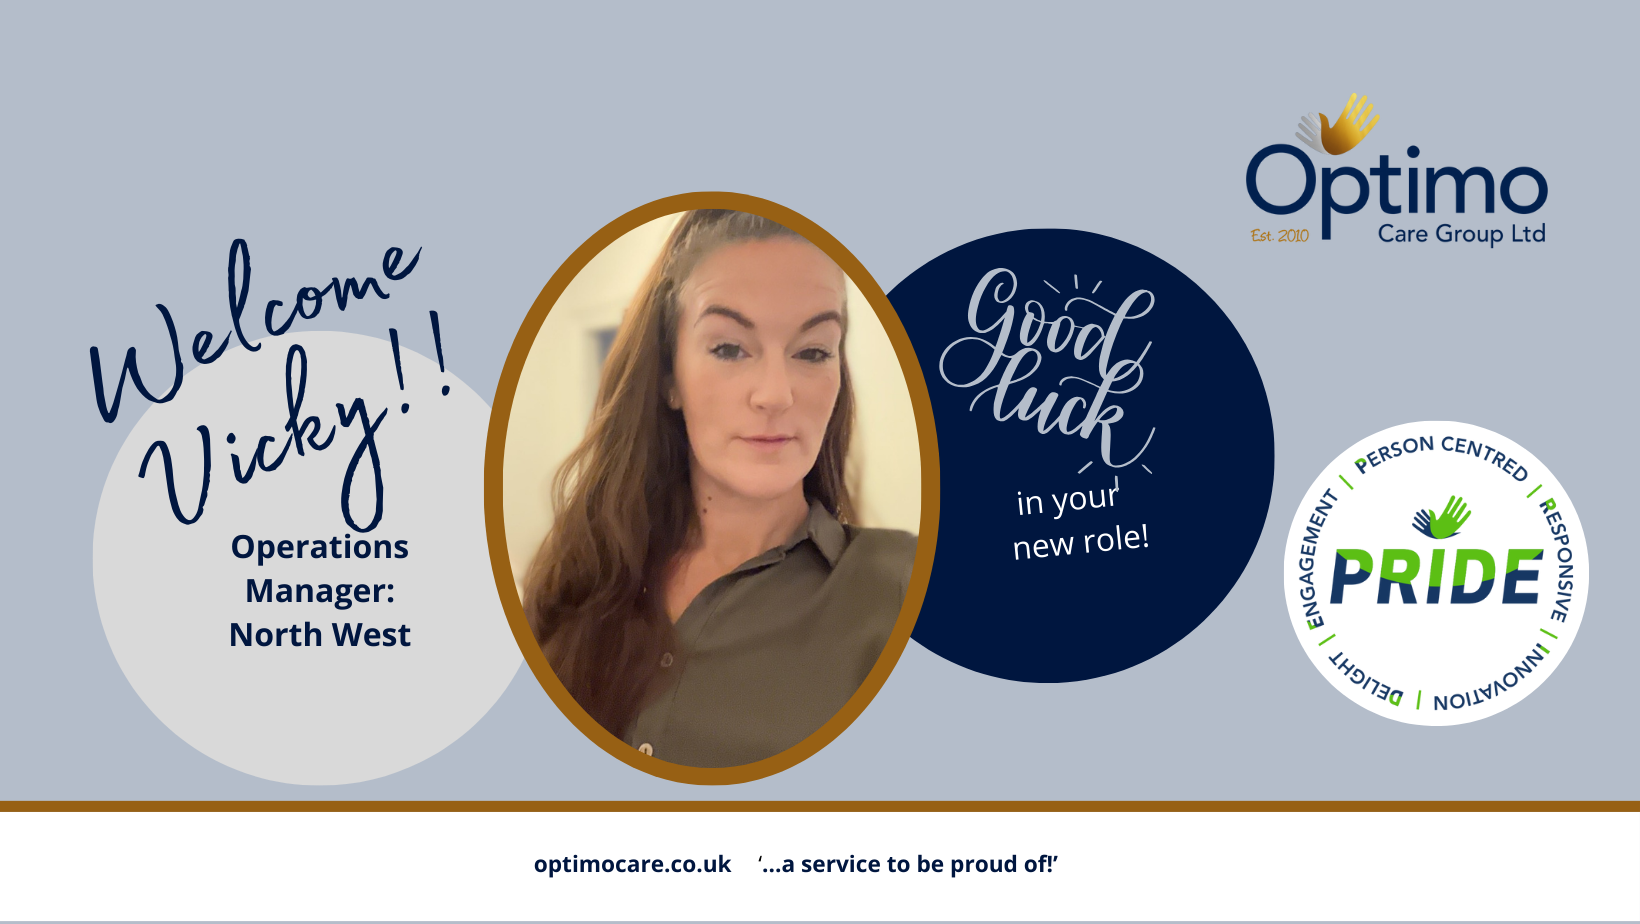 Welcome Vicky – Our Operations Manager for the North West!